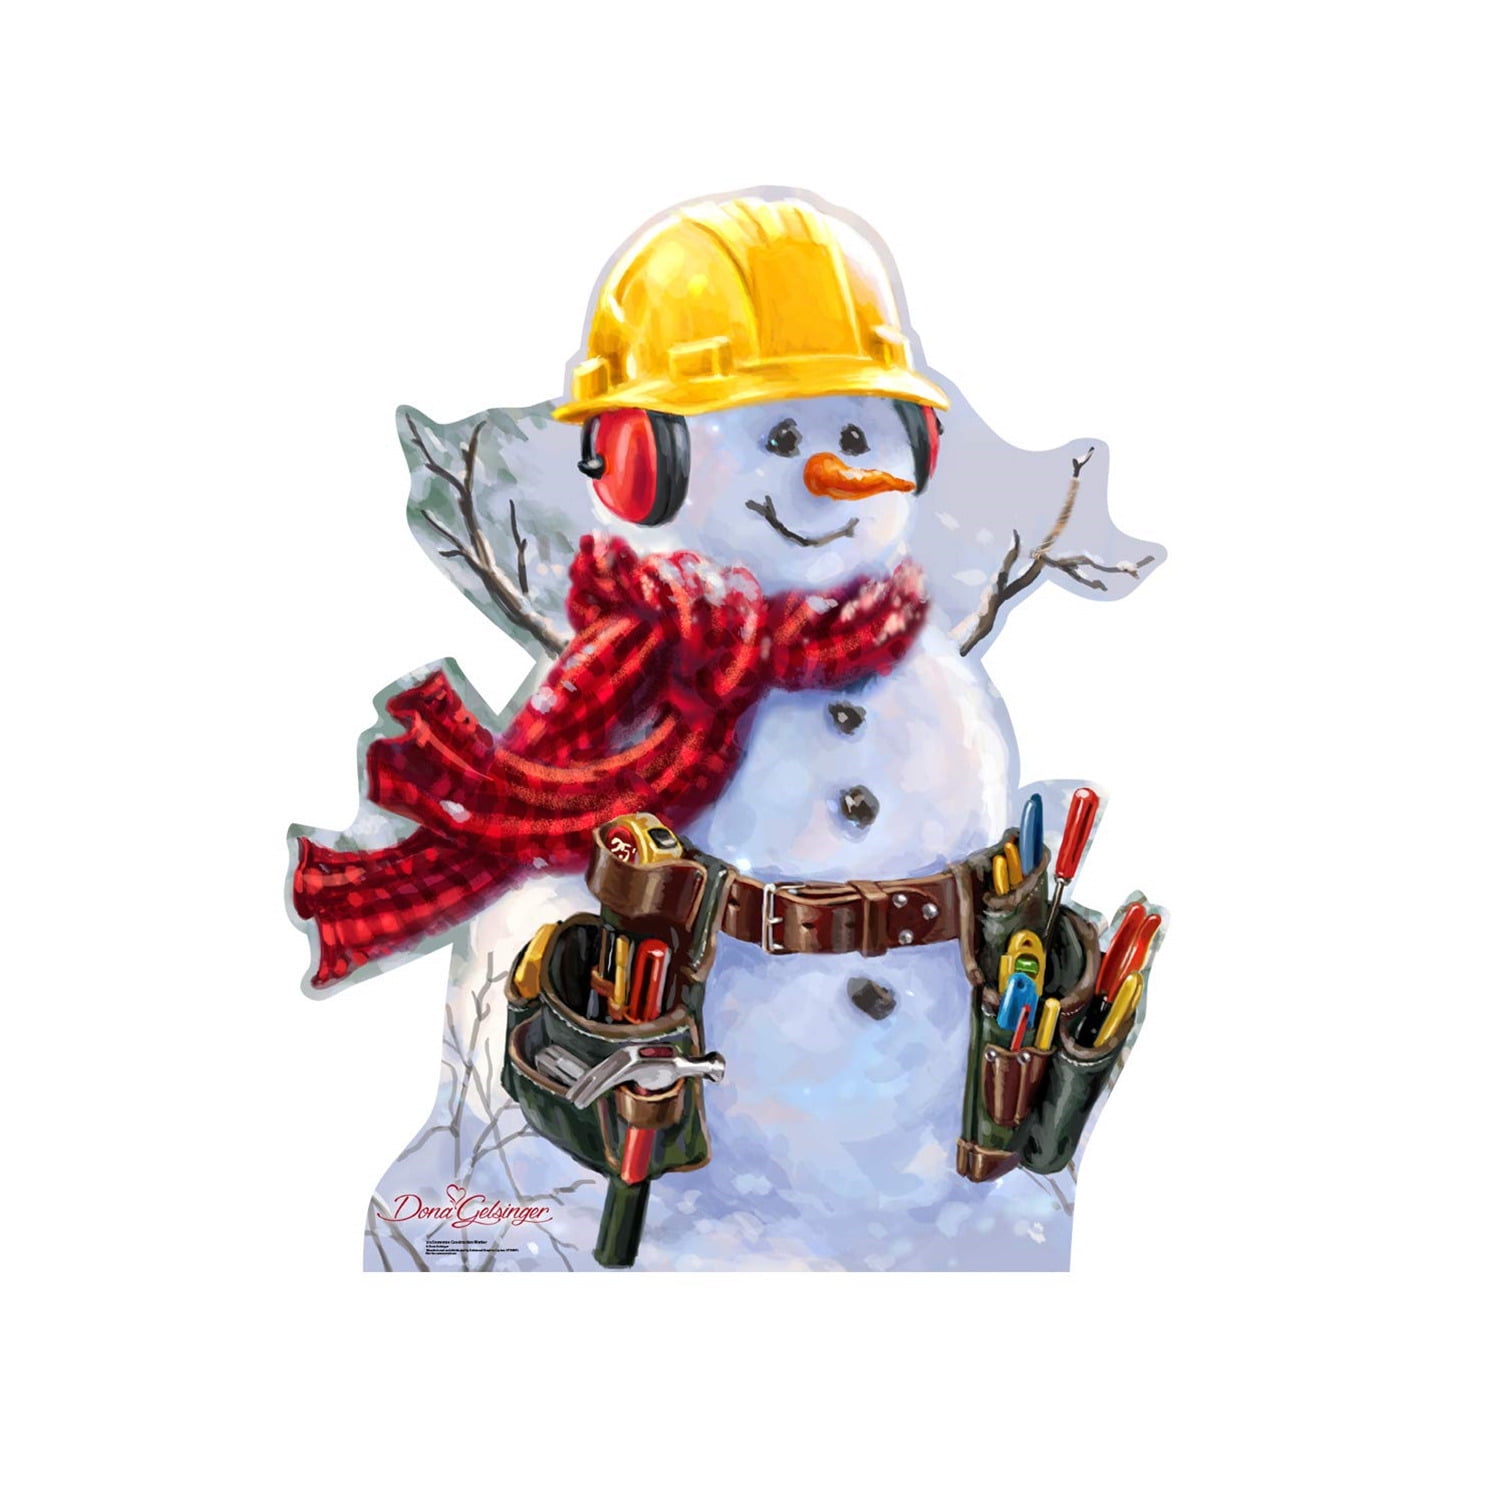 Picture of Advanced Graphics 2113 56 x 46 in. Snowman Construction Worker - Dona Gelsinger Art Cardboard Standup